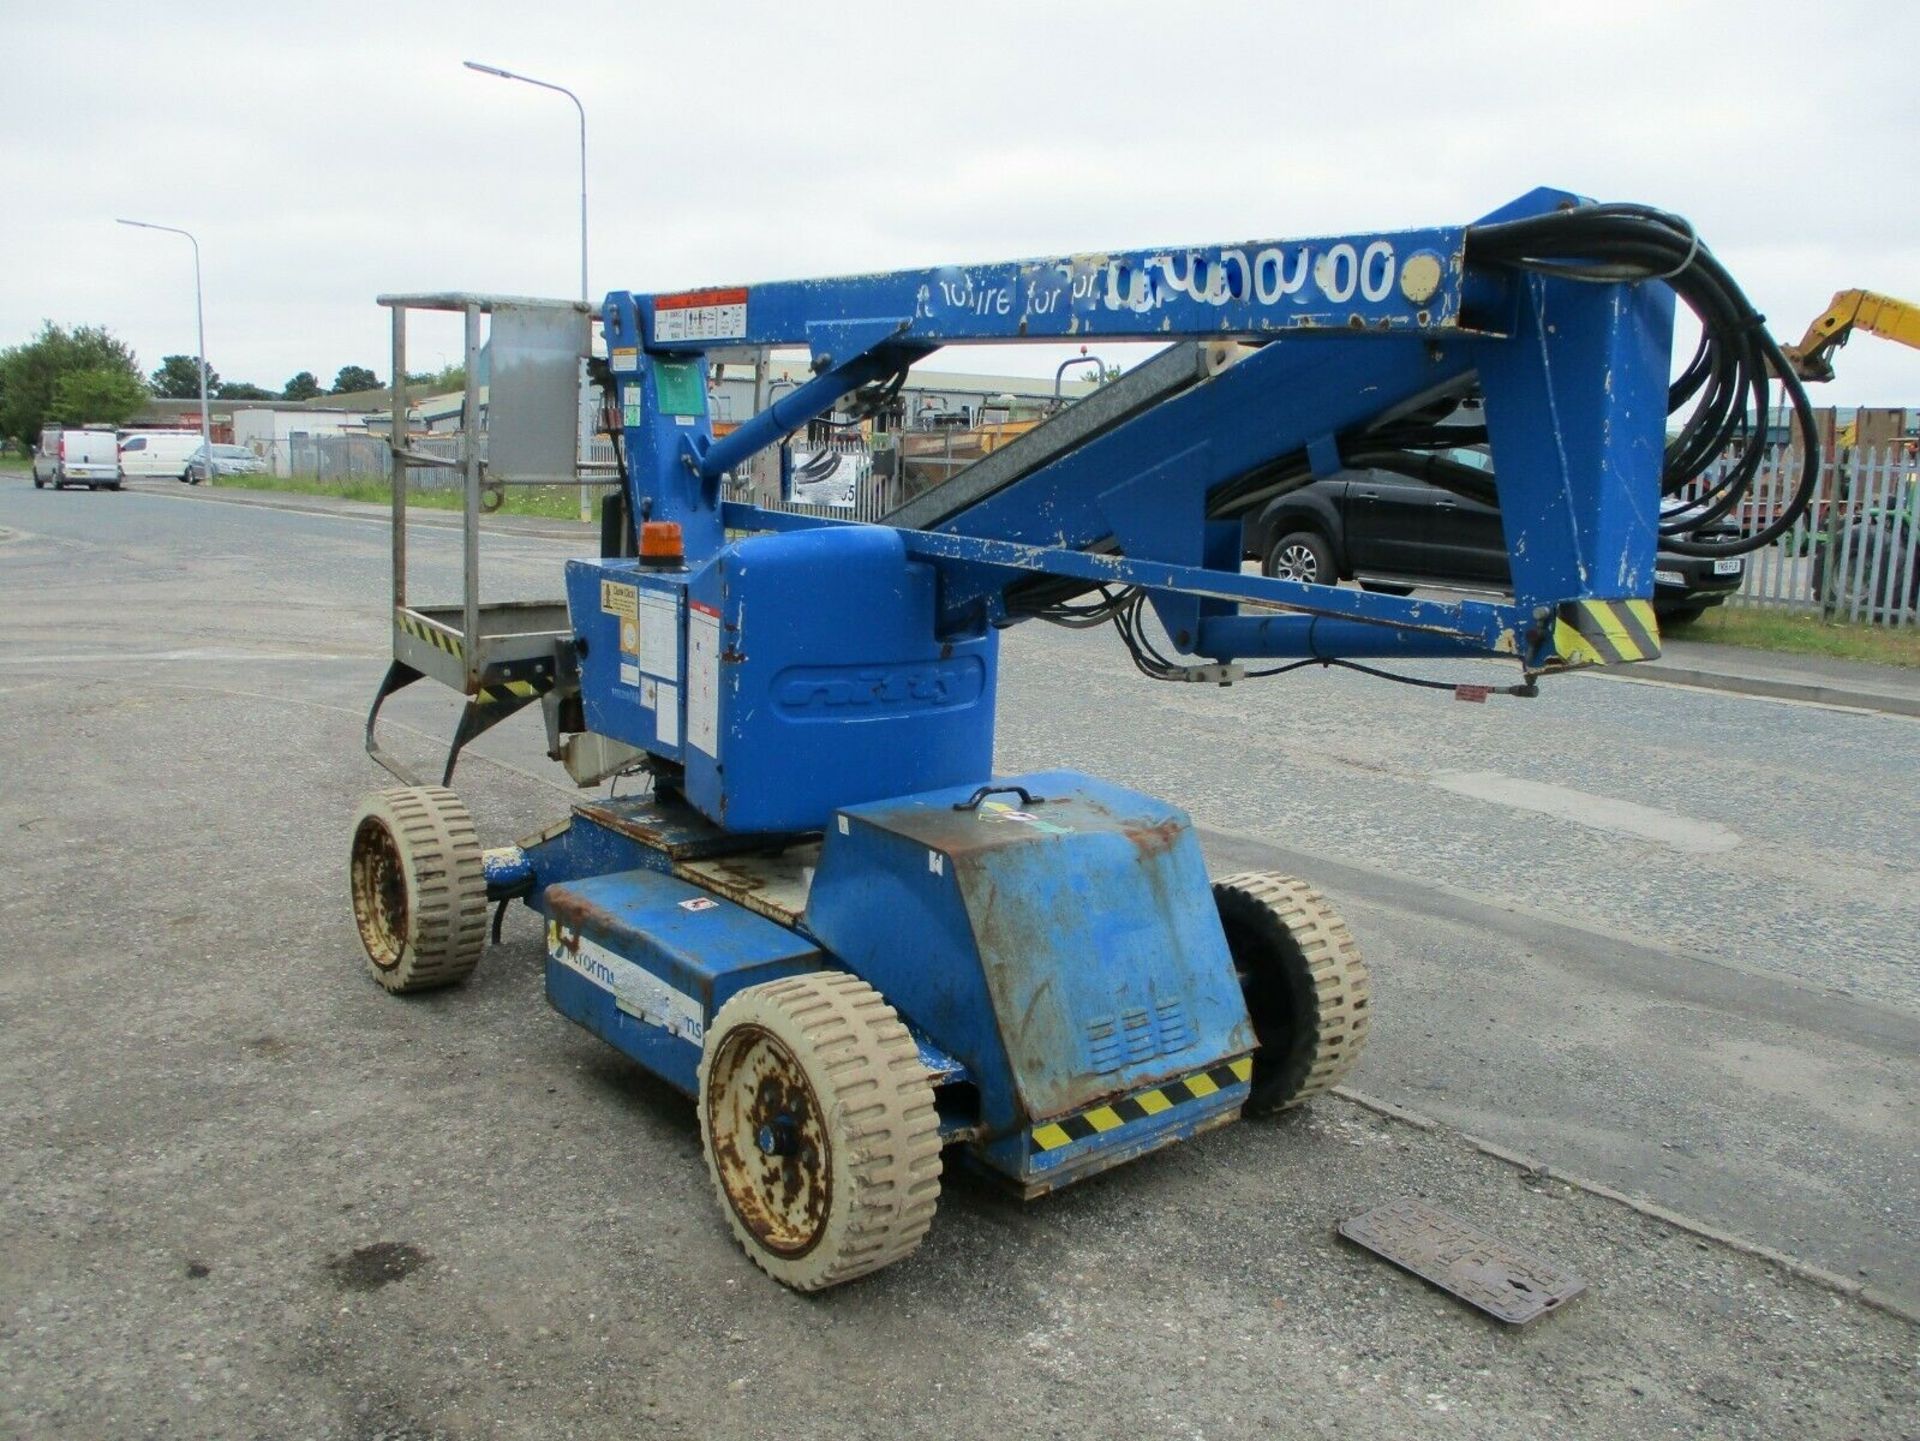 Nifty Lift HR12 Self Propelled Access Platform 2008 - Image 7 of 9